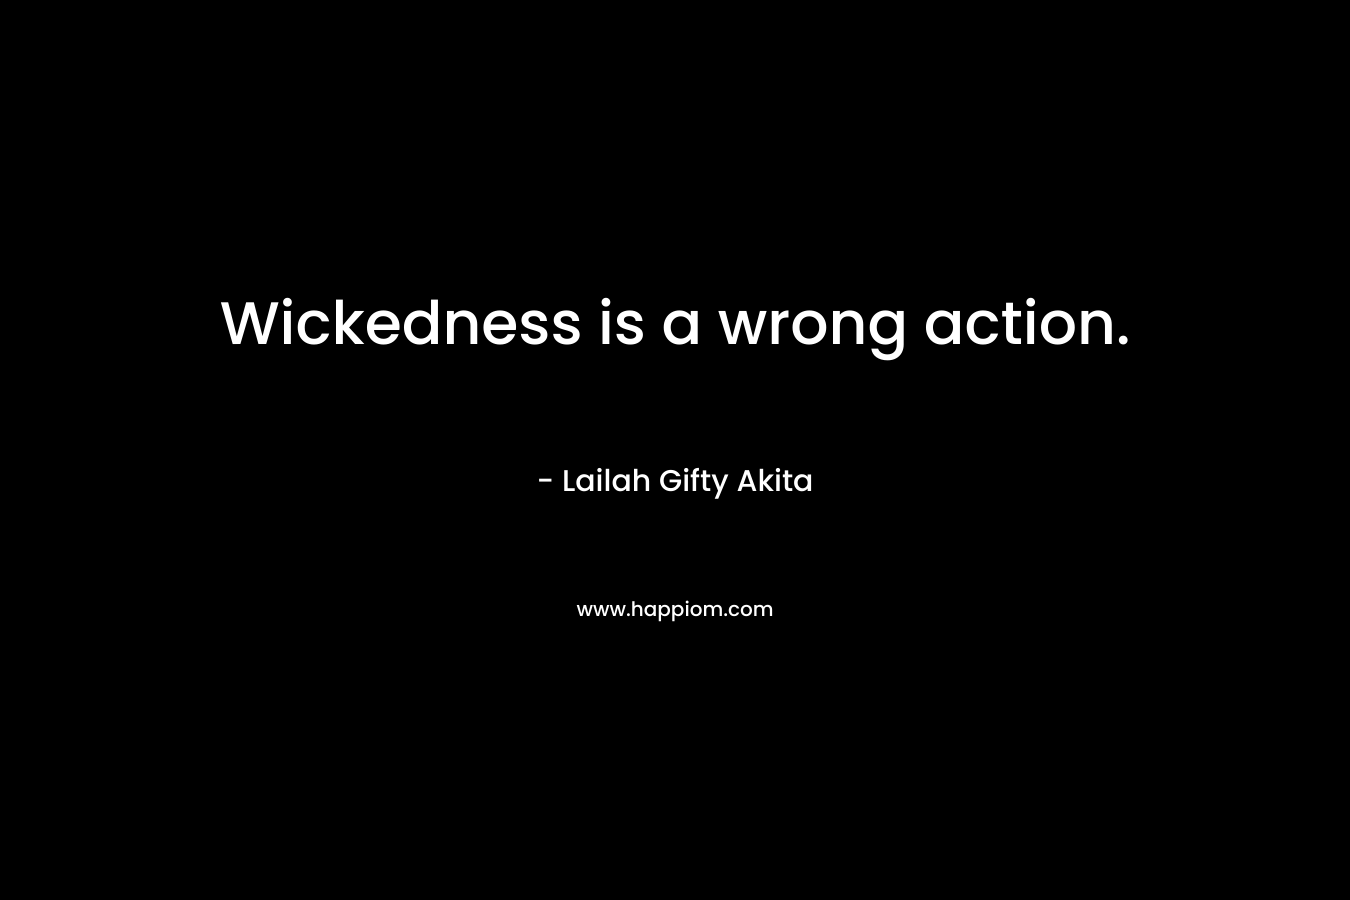 Wickedness is a wrong action. – Lailah Gifty Akita